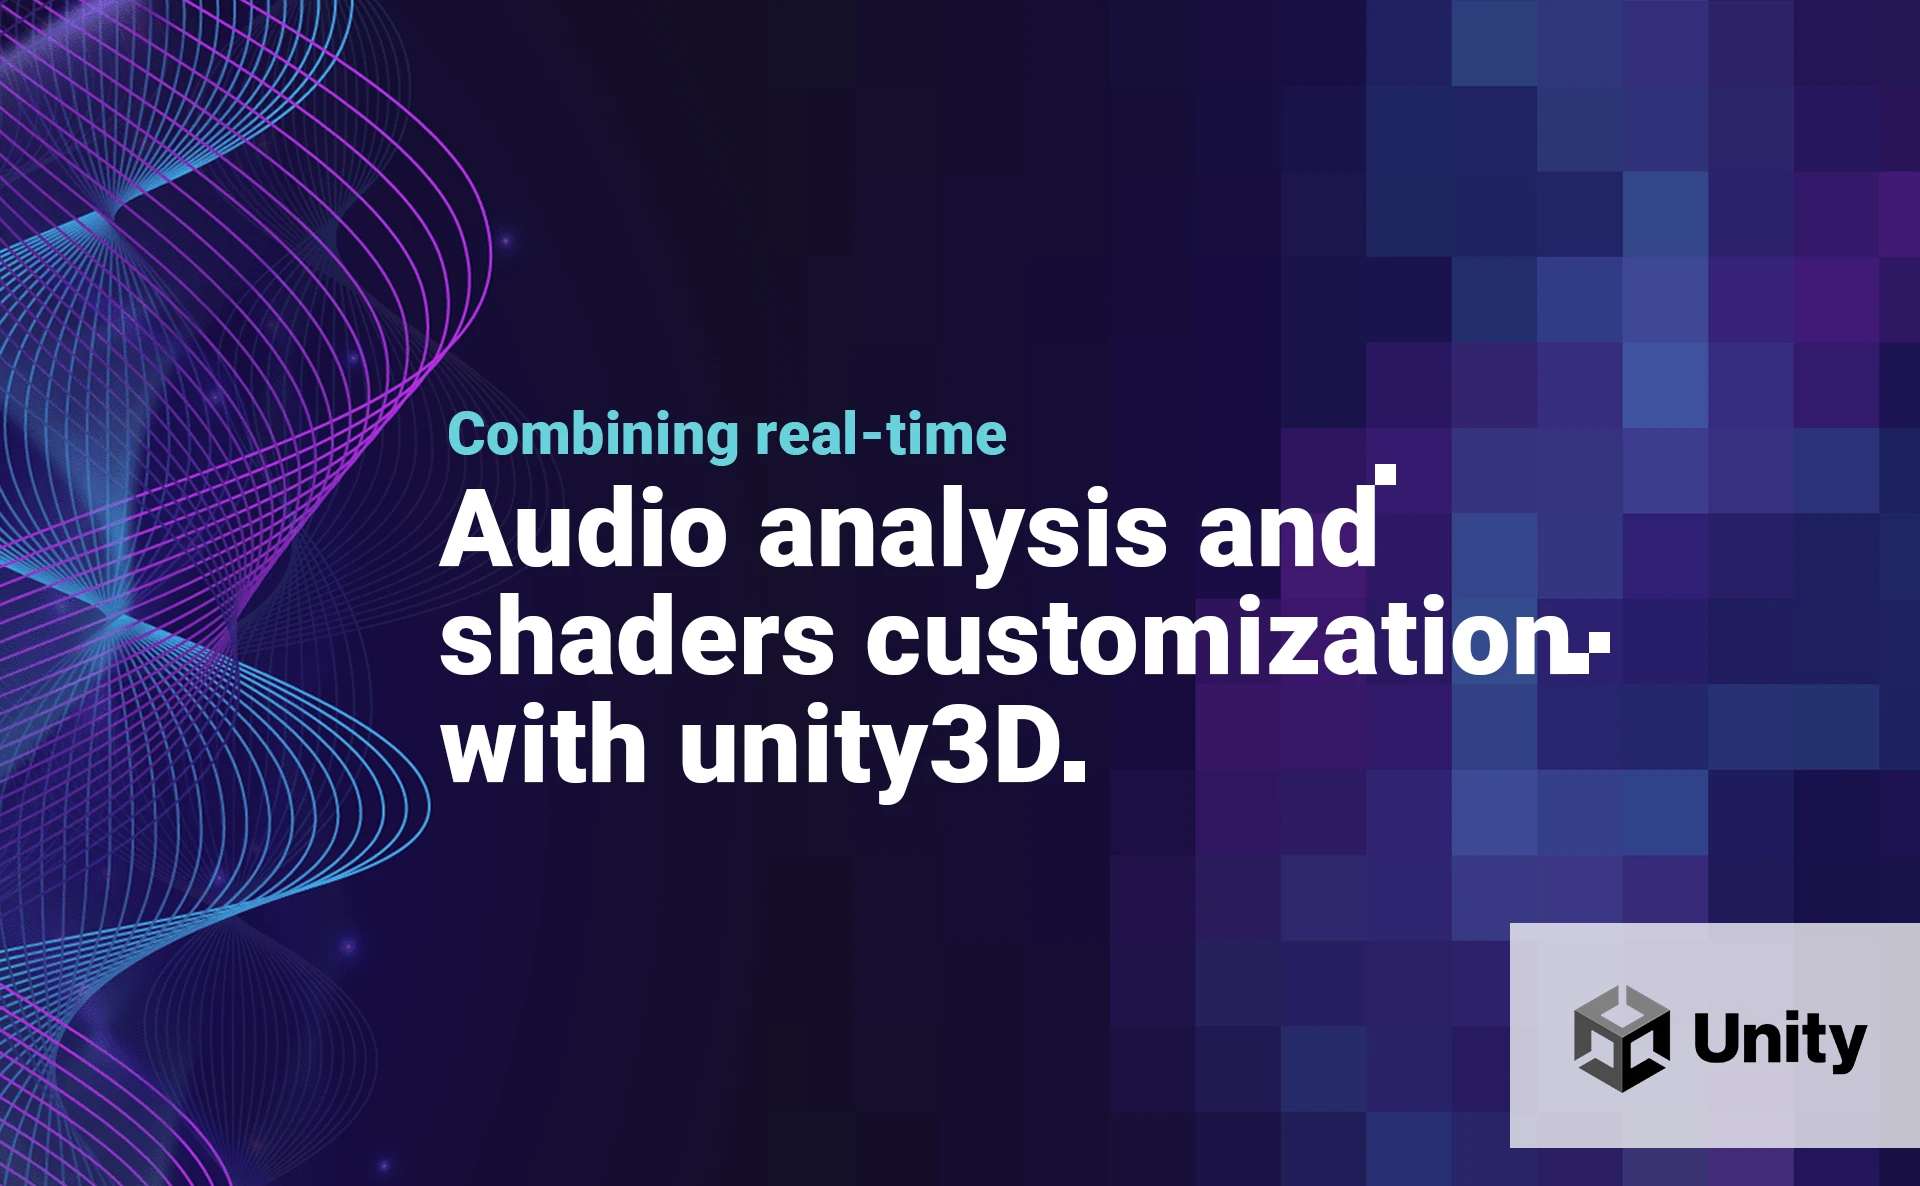 Combining real-time audio analysis and shaders customization with Unity3D